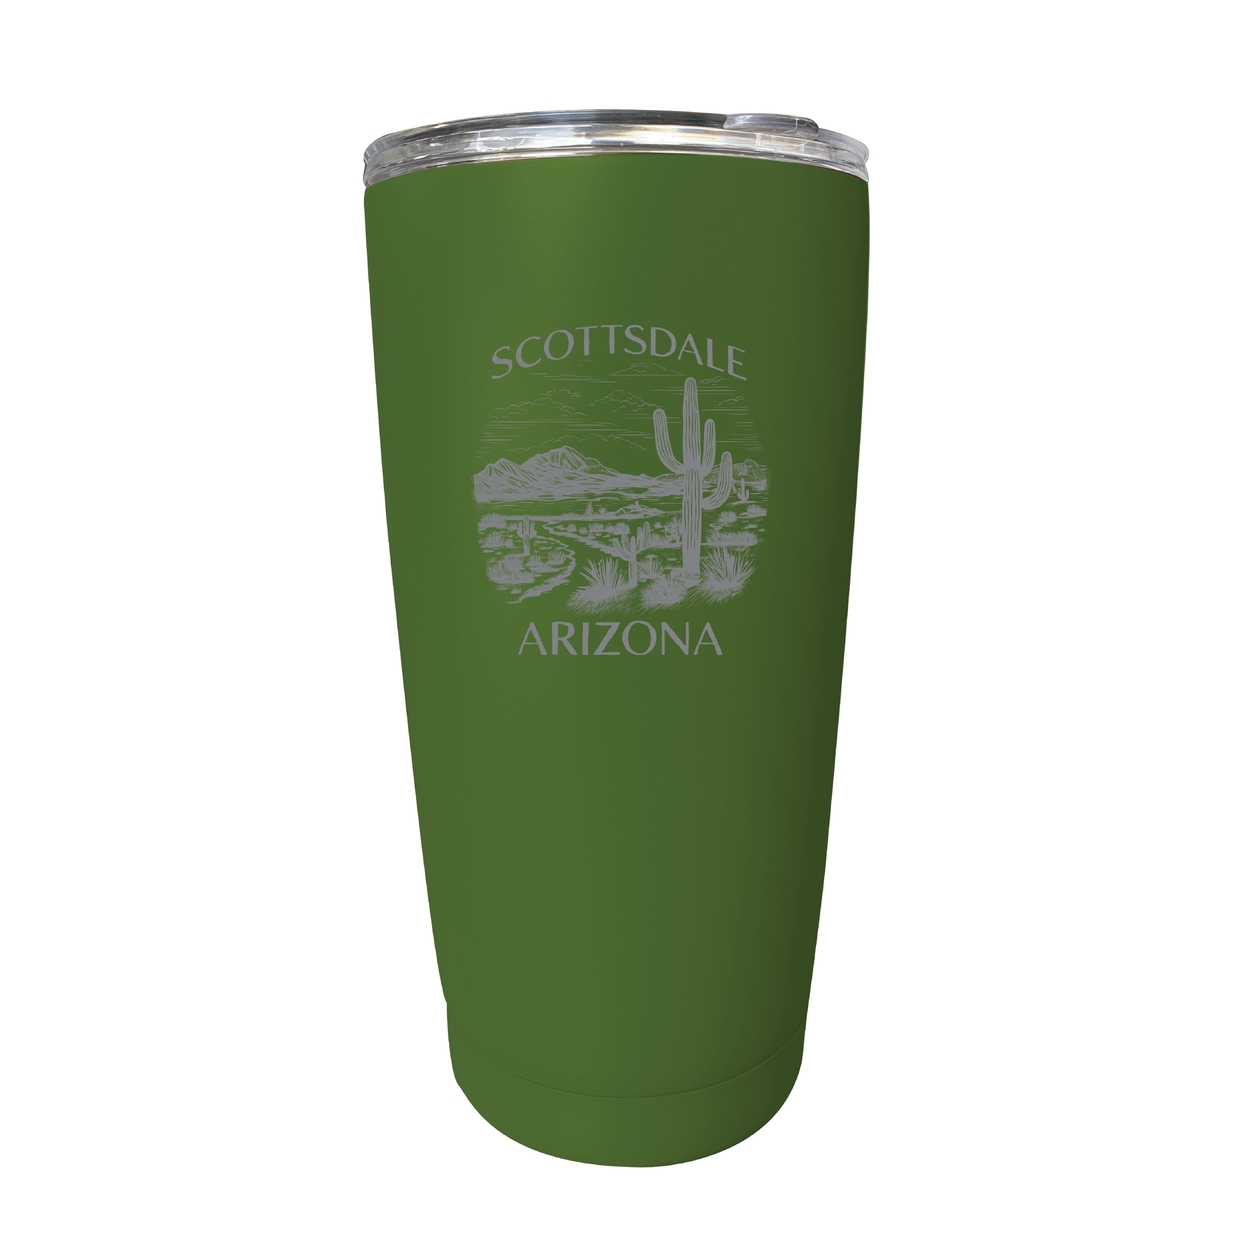 Scottsdale Arizona Souvenir 16 Oz Engraved Stainless Steel Insulated Tumbler - Green,,2-Pack